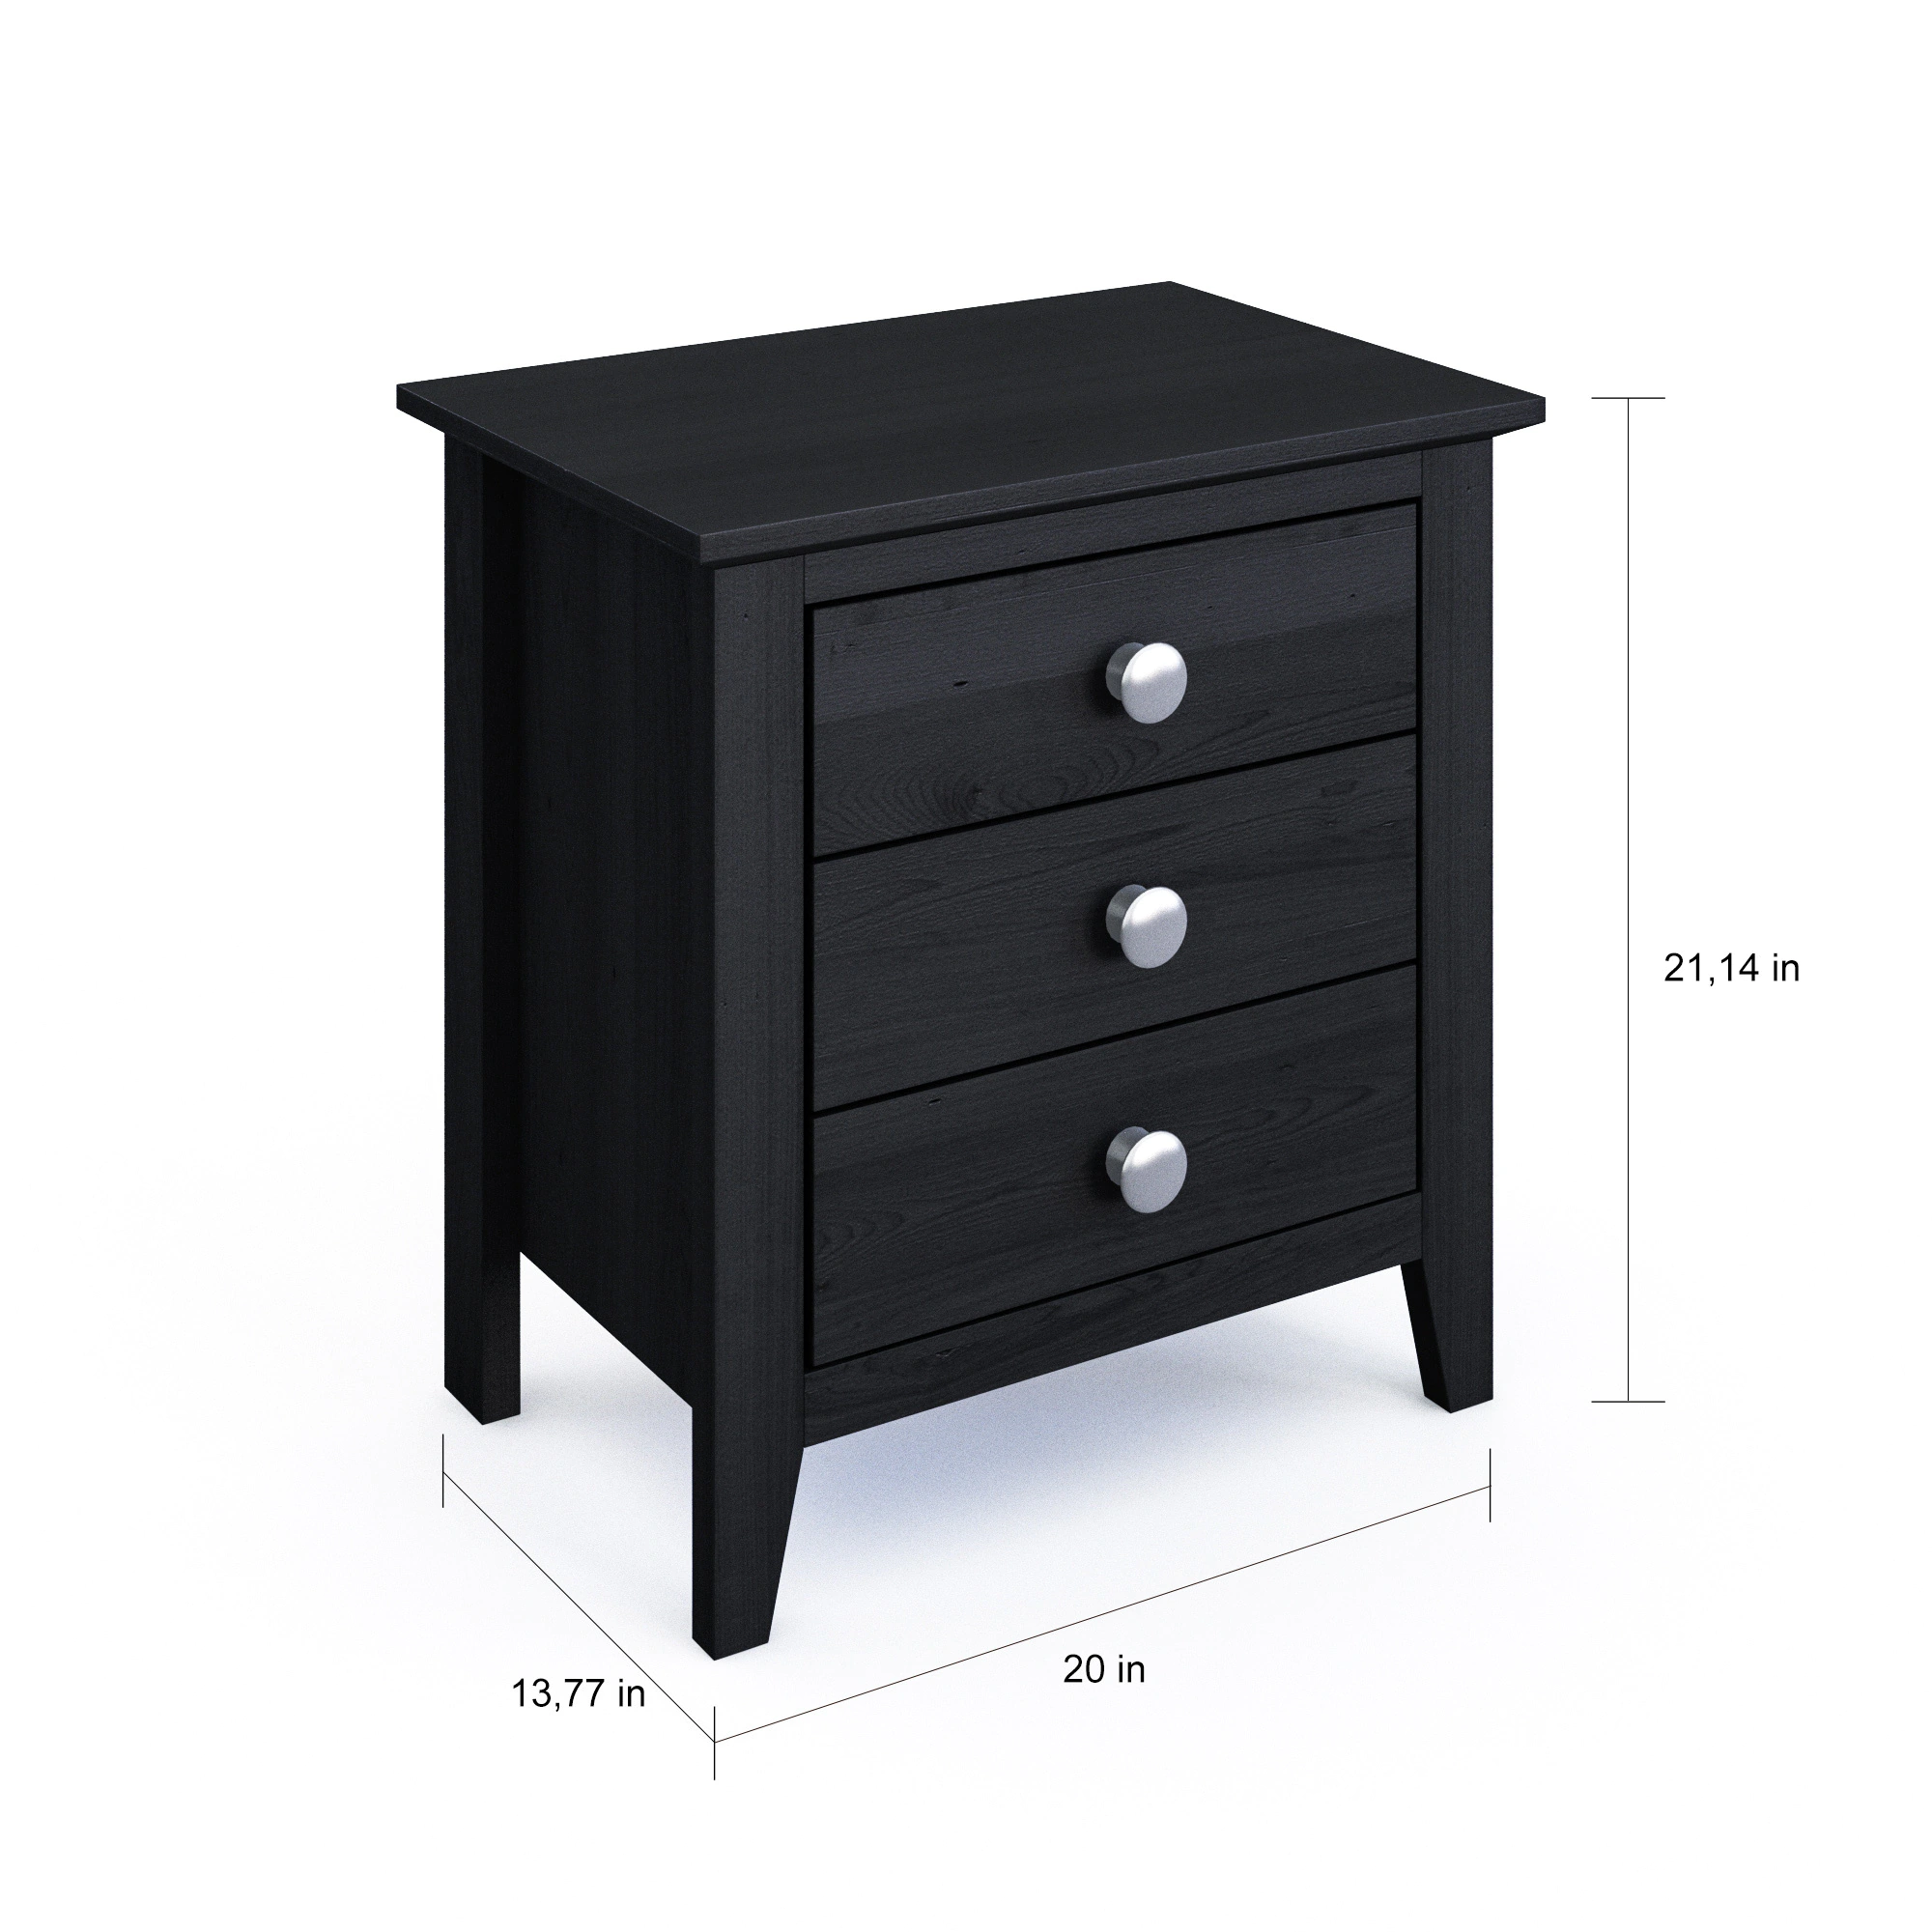 porch den oakledge park dunder drawer end table nightstand timmy accent black free shipping today oval acrylic coffee teal lamp corner hall marble top bedside lamps with usb white